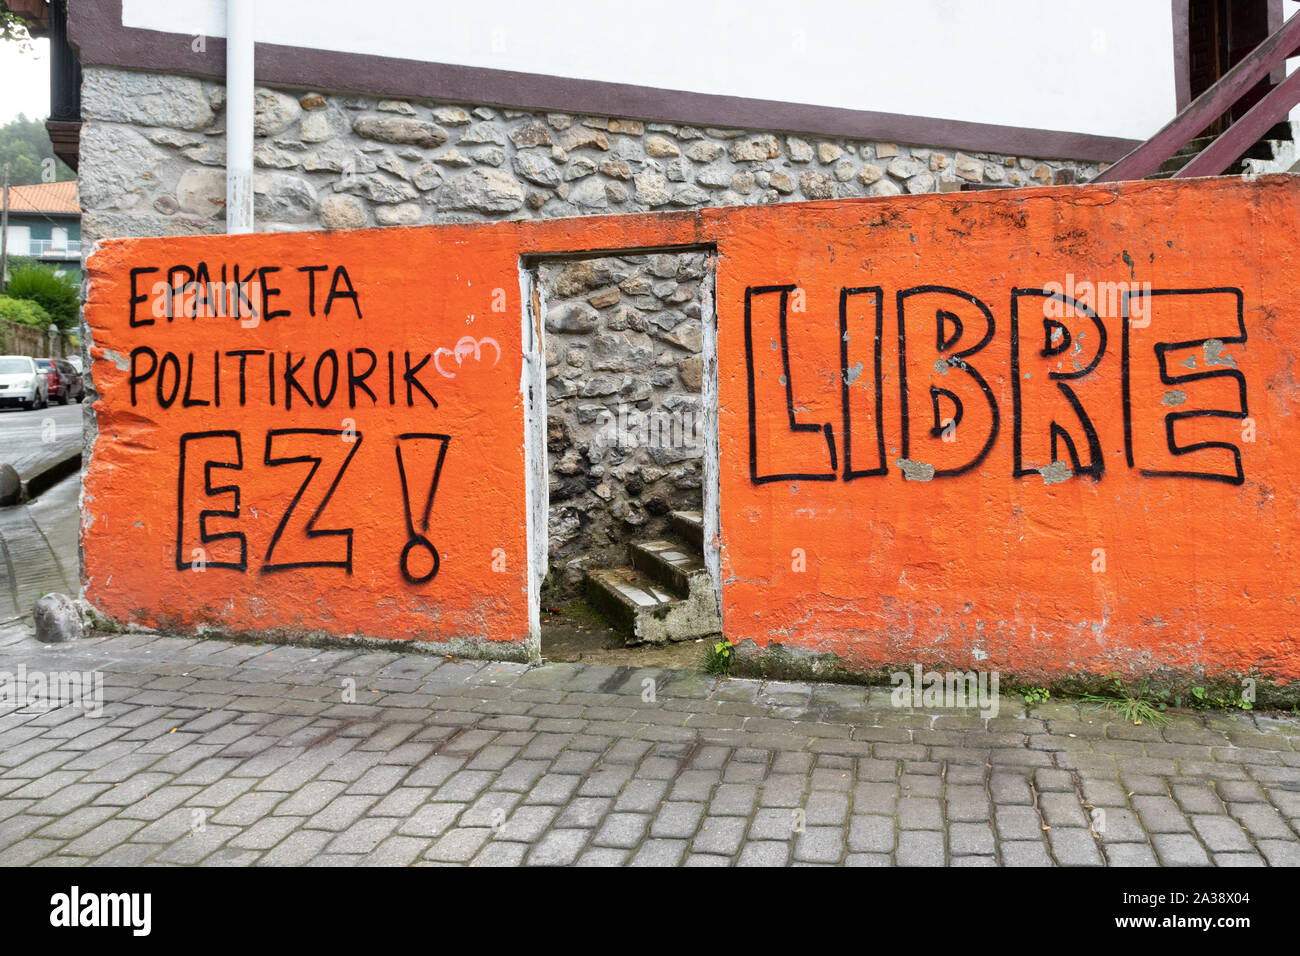 Basque Independence graffiti 'libre' in the Basque village of Ea, Biscay, Spain Stock Photo